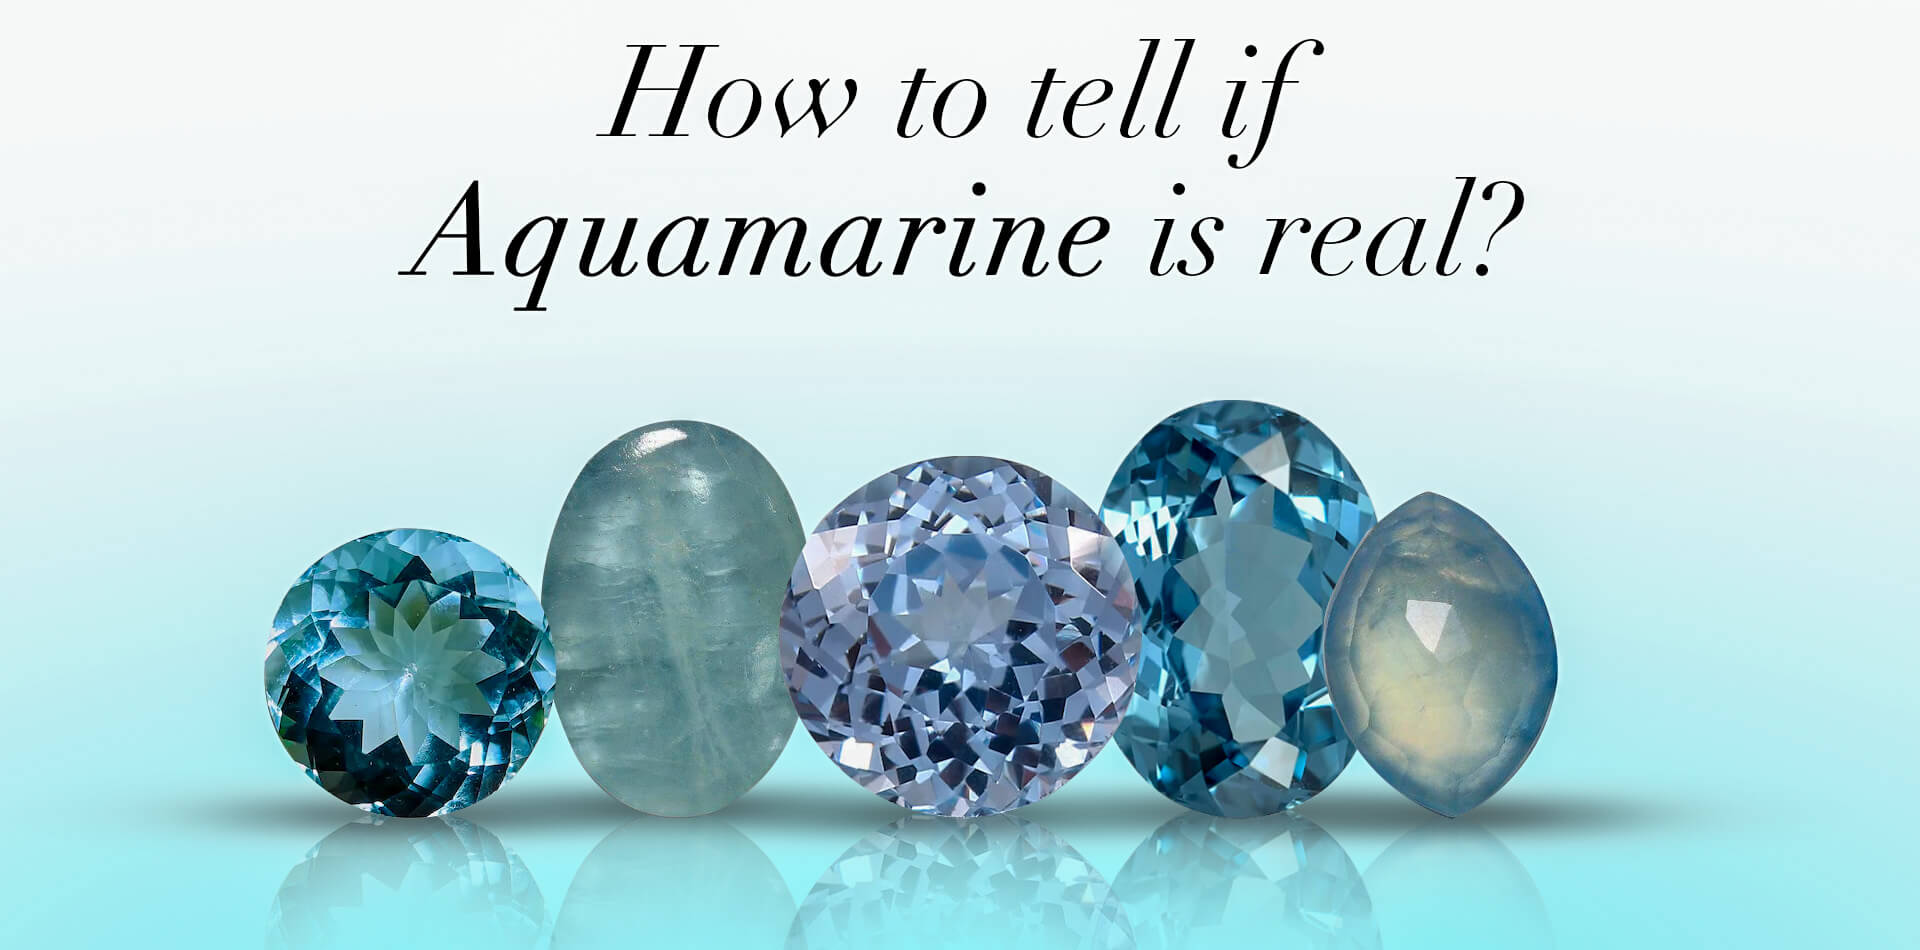 How To Tell If Aquamarine Is Real?